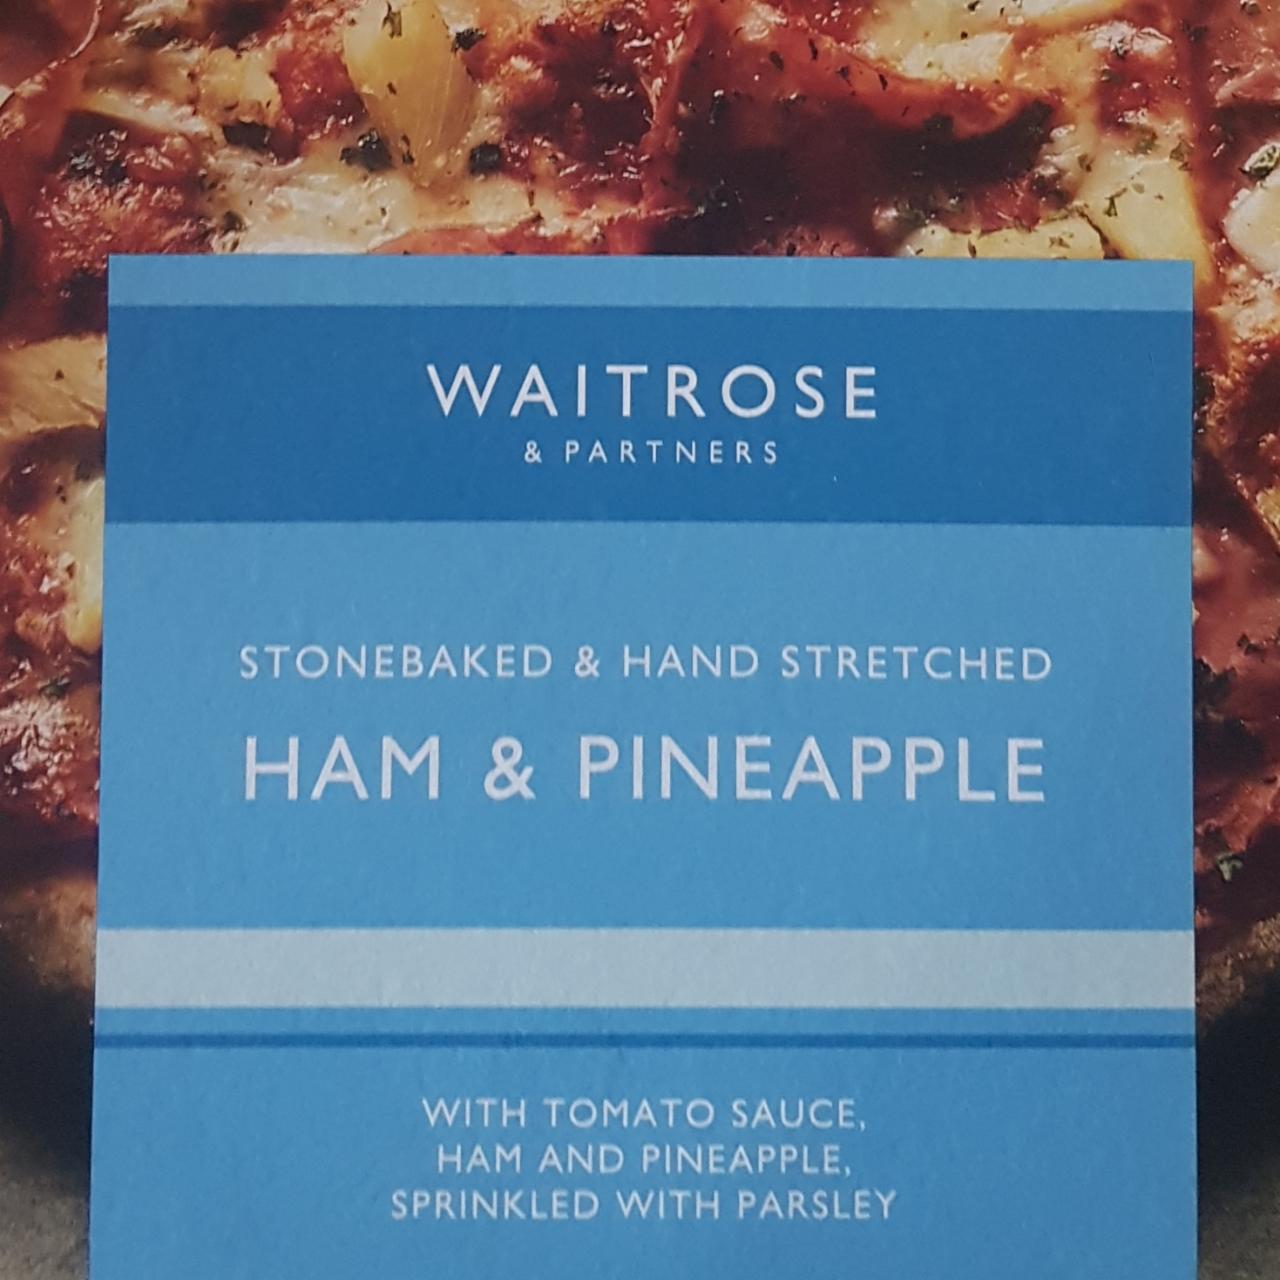 Fotografie - Stonebaked & hand stretched ham & pineapple with tomato sauce, sprinkley with parsley Waitrose